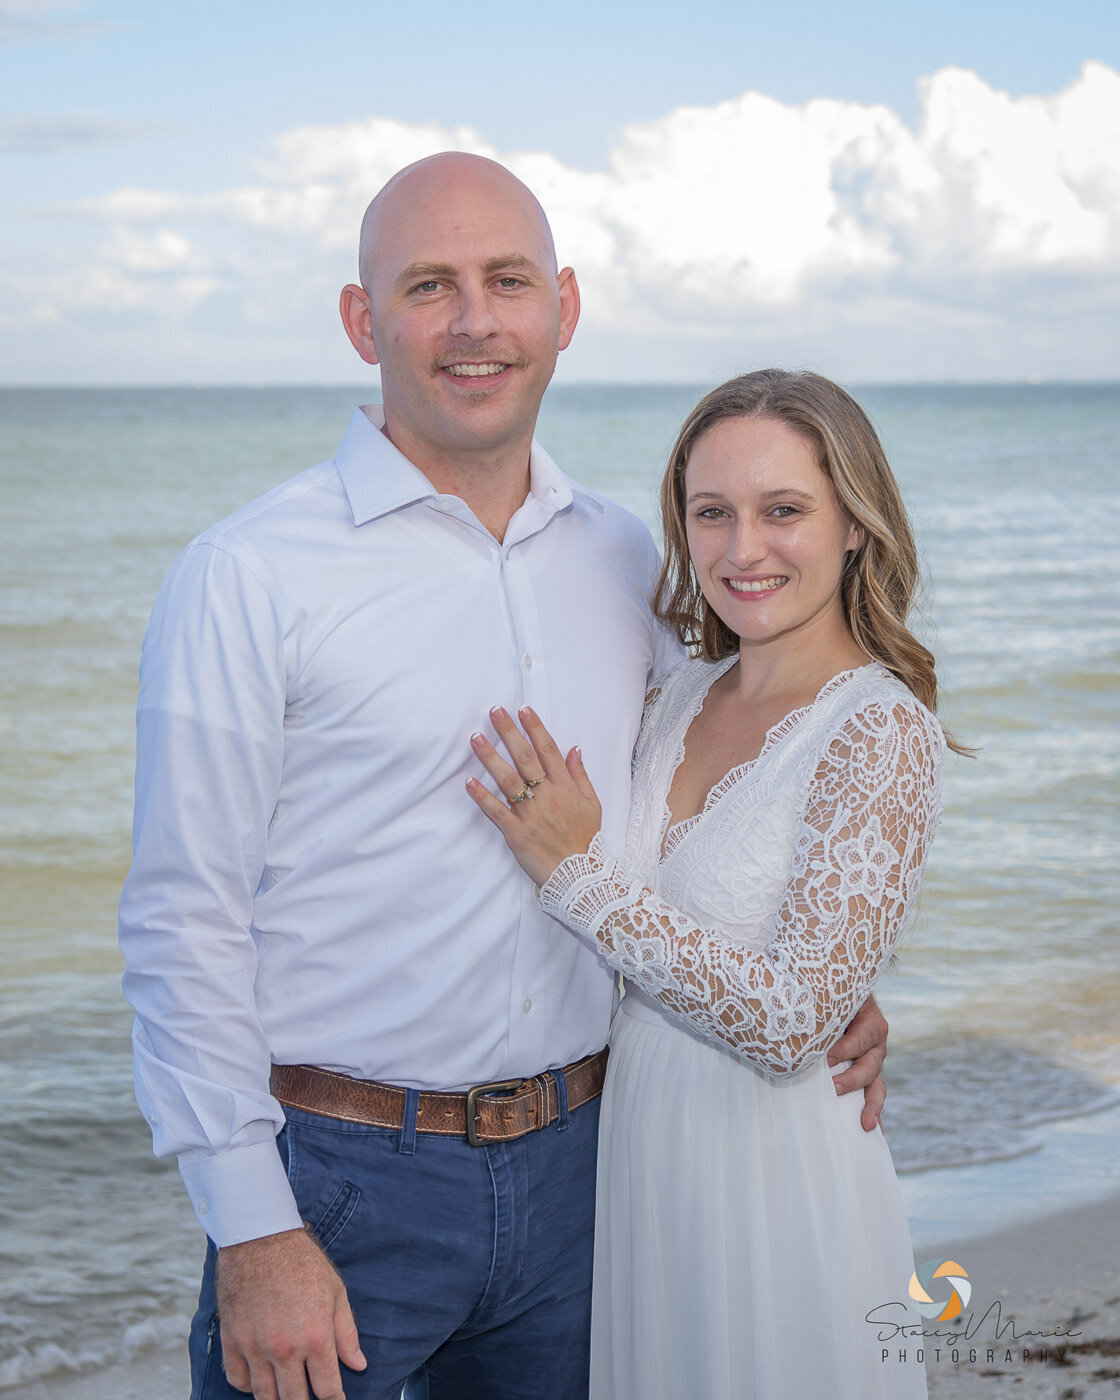 Newlyweds pose in front of the ocean for their wedding photos.